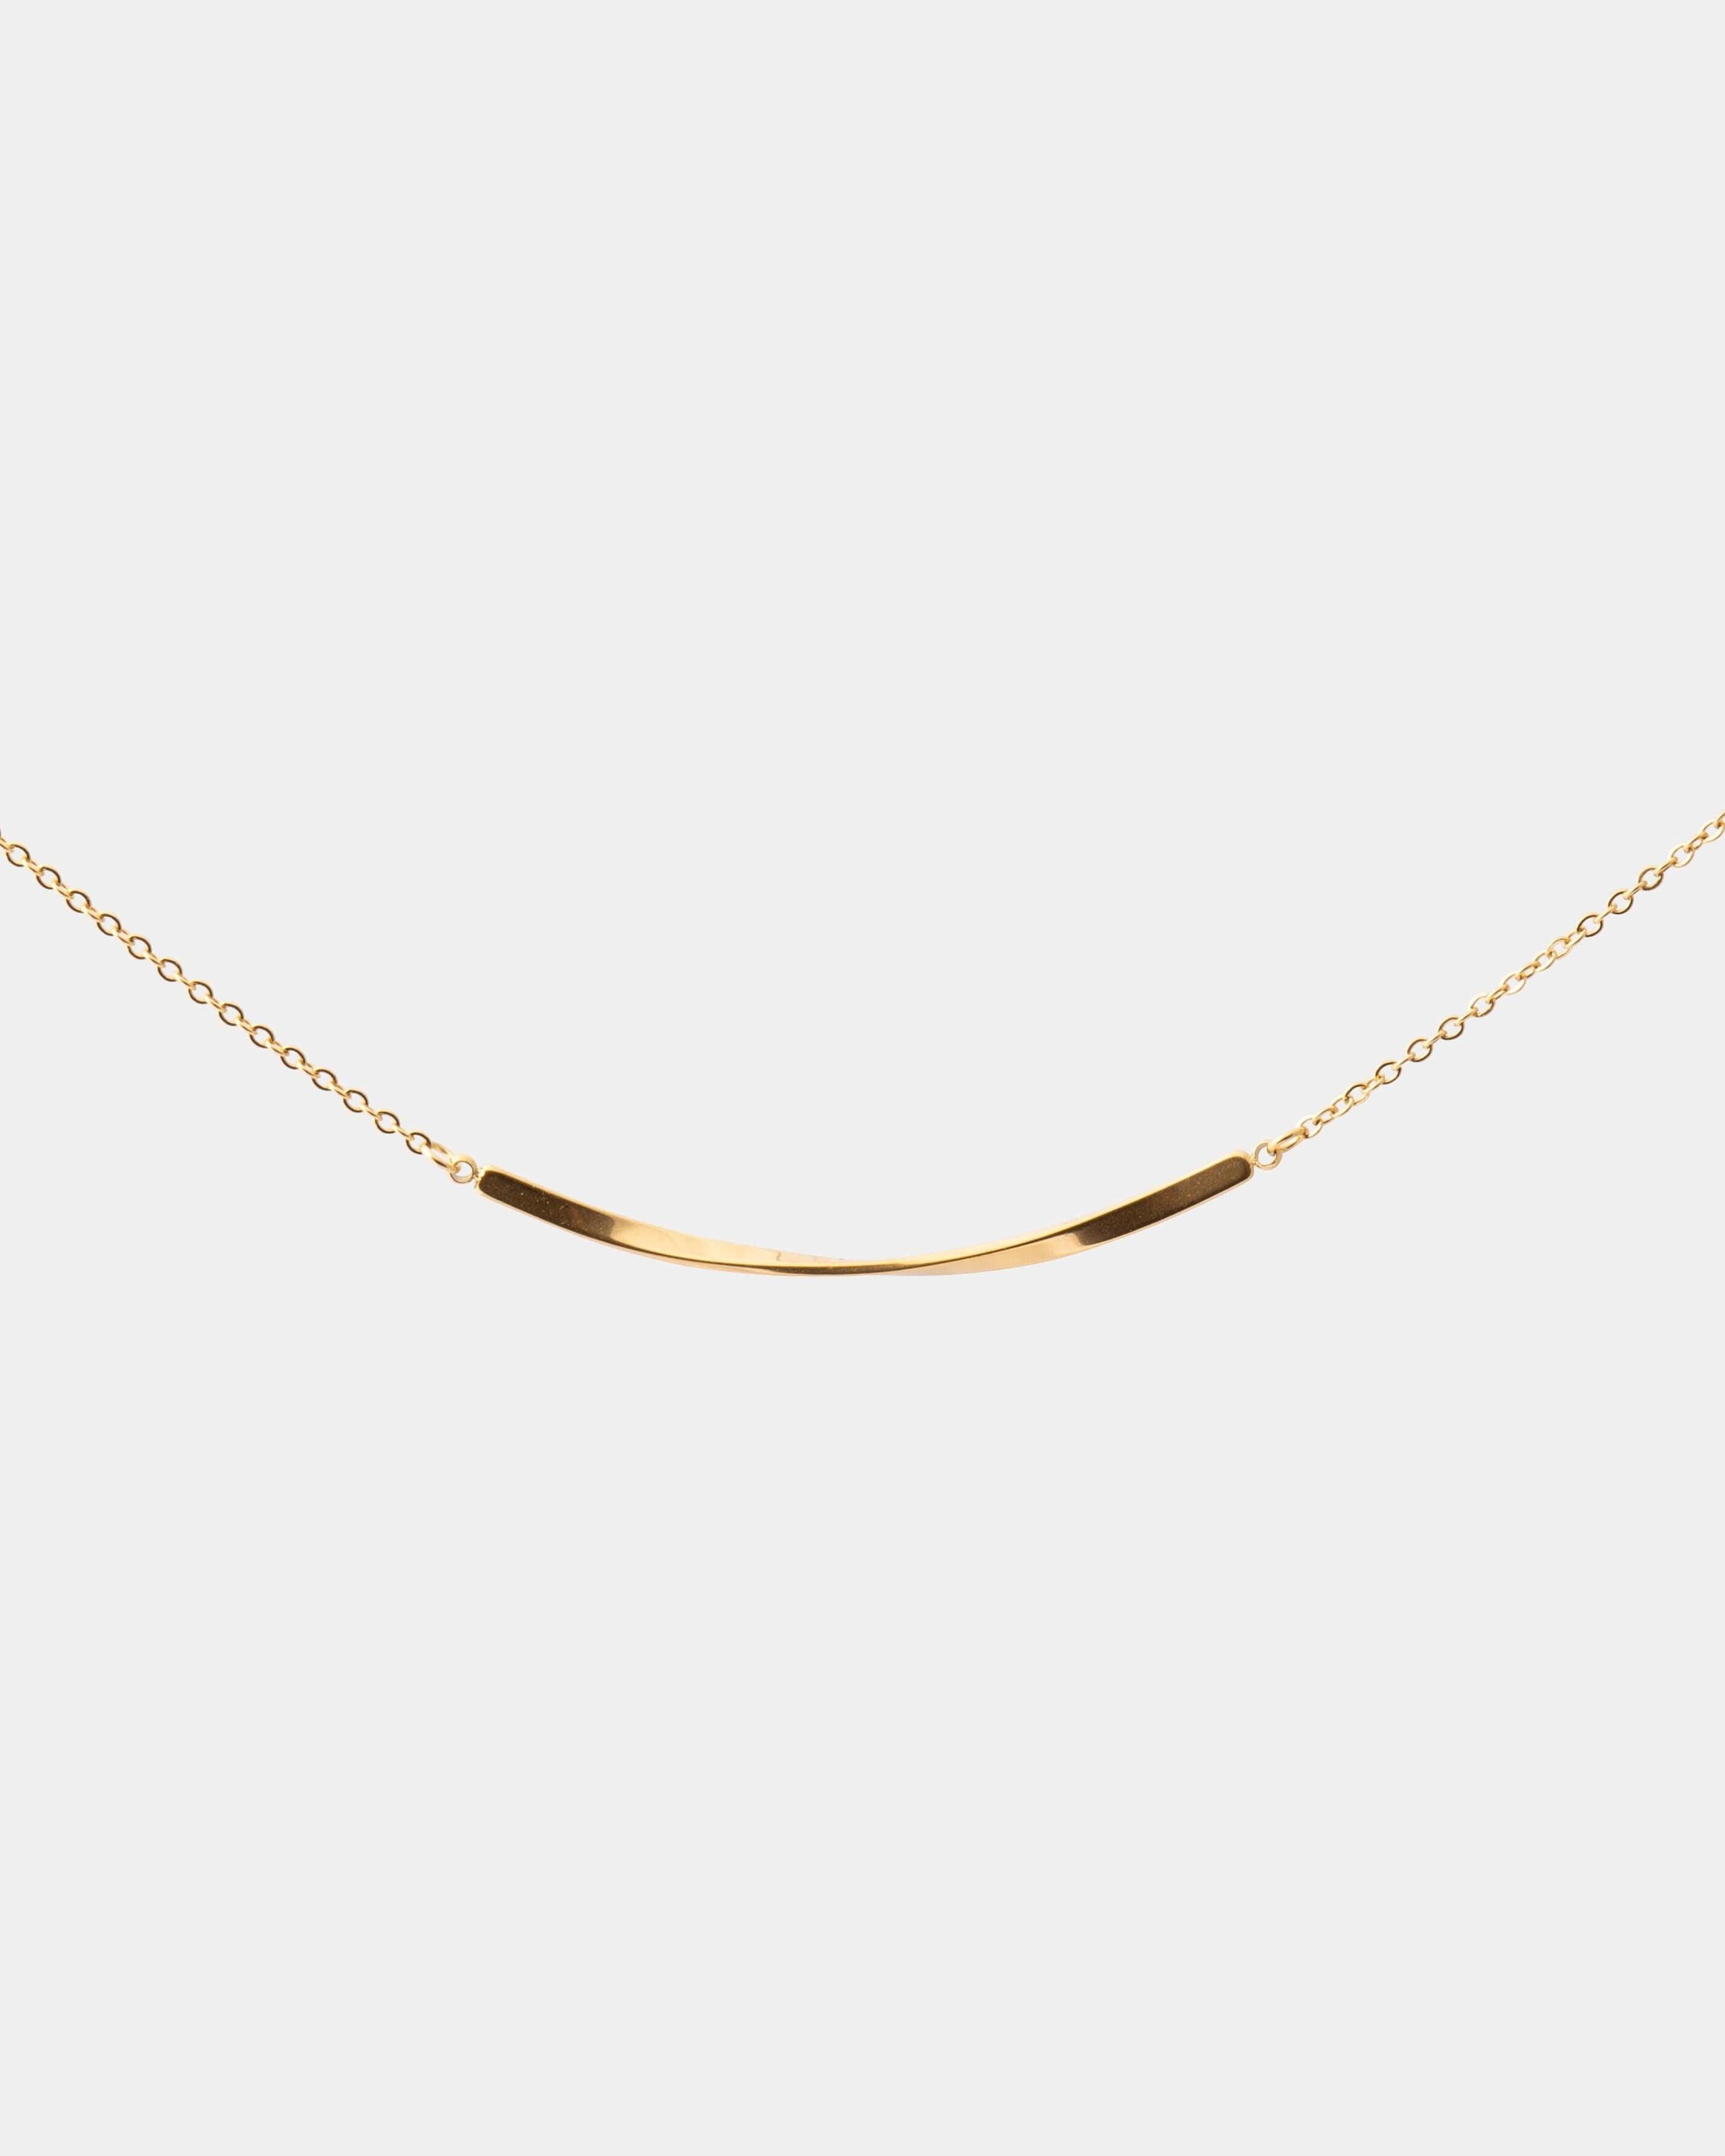 HELIX BAR CHAIN NECKLACE - LIMELY